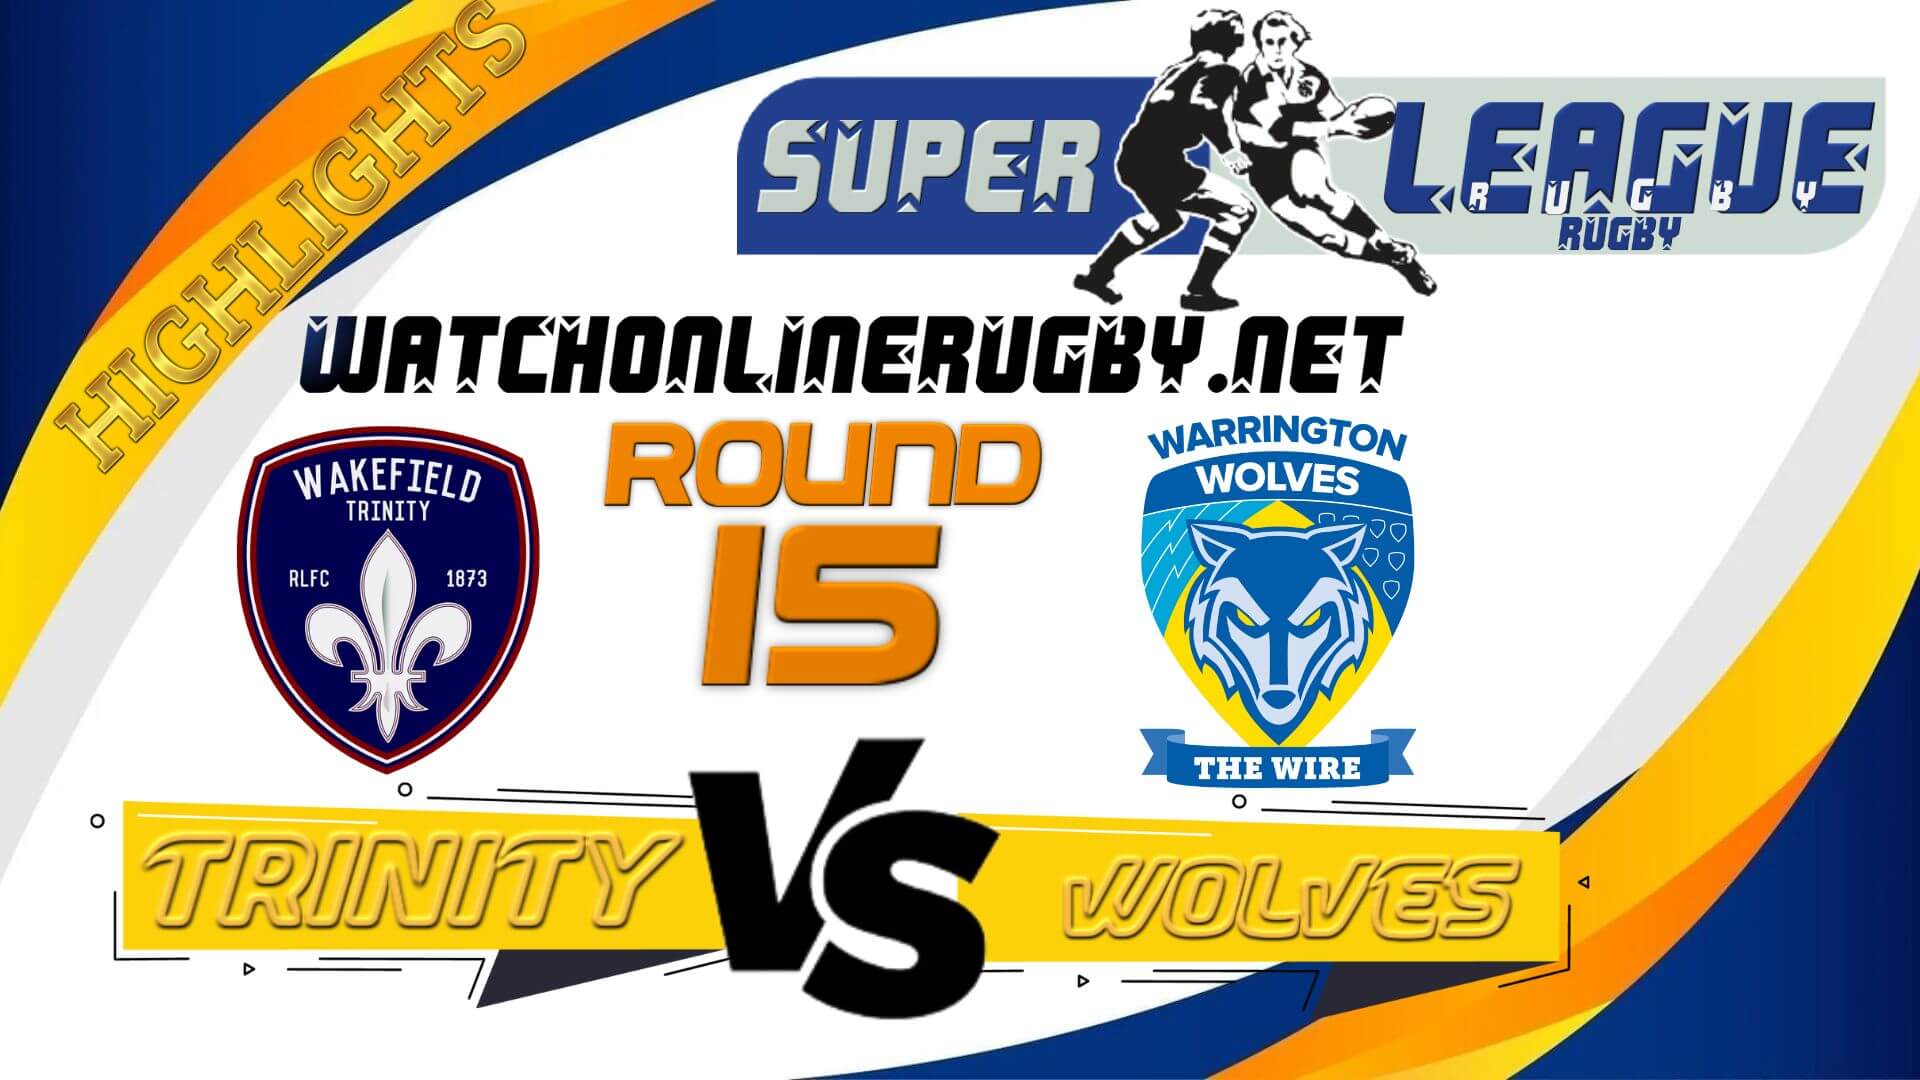 Wakefield Trinity Vs Warrington Wolves Super League Rugby 2022 RD 15